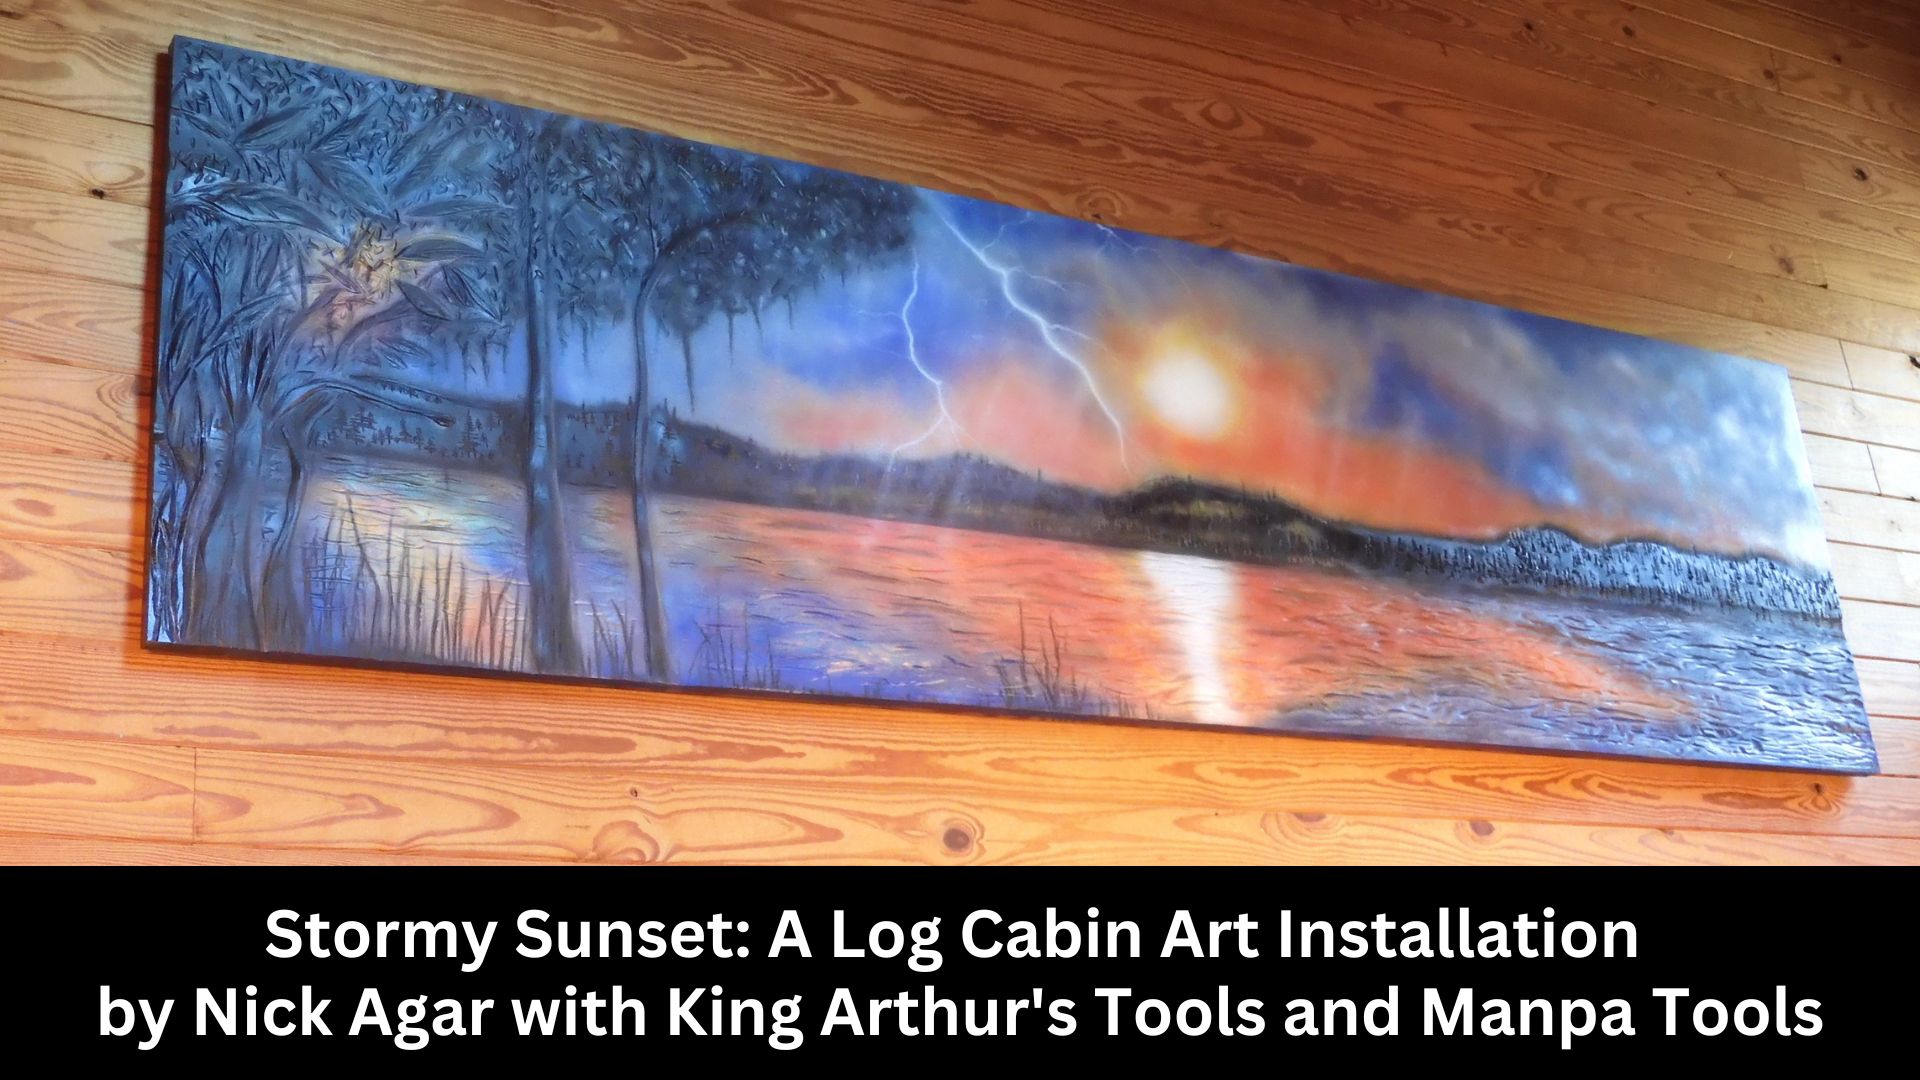 Stormy Sunset: A Log Cabin Art Installation by Nick Agar with King Arthur's Tools and Manpa Tools